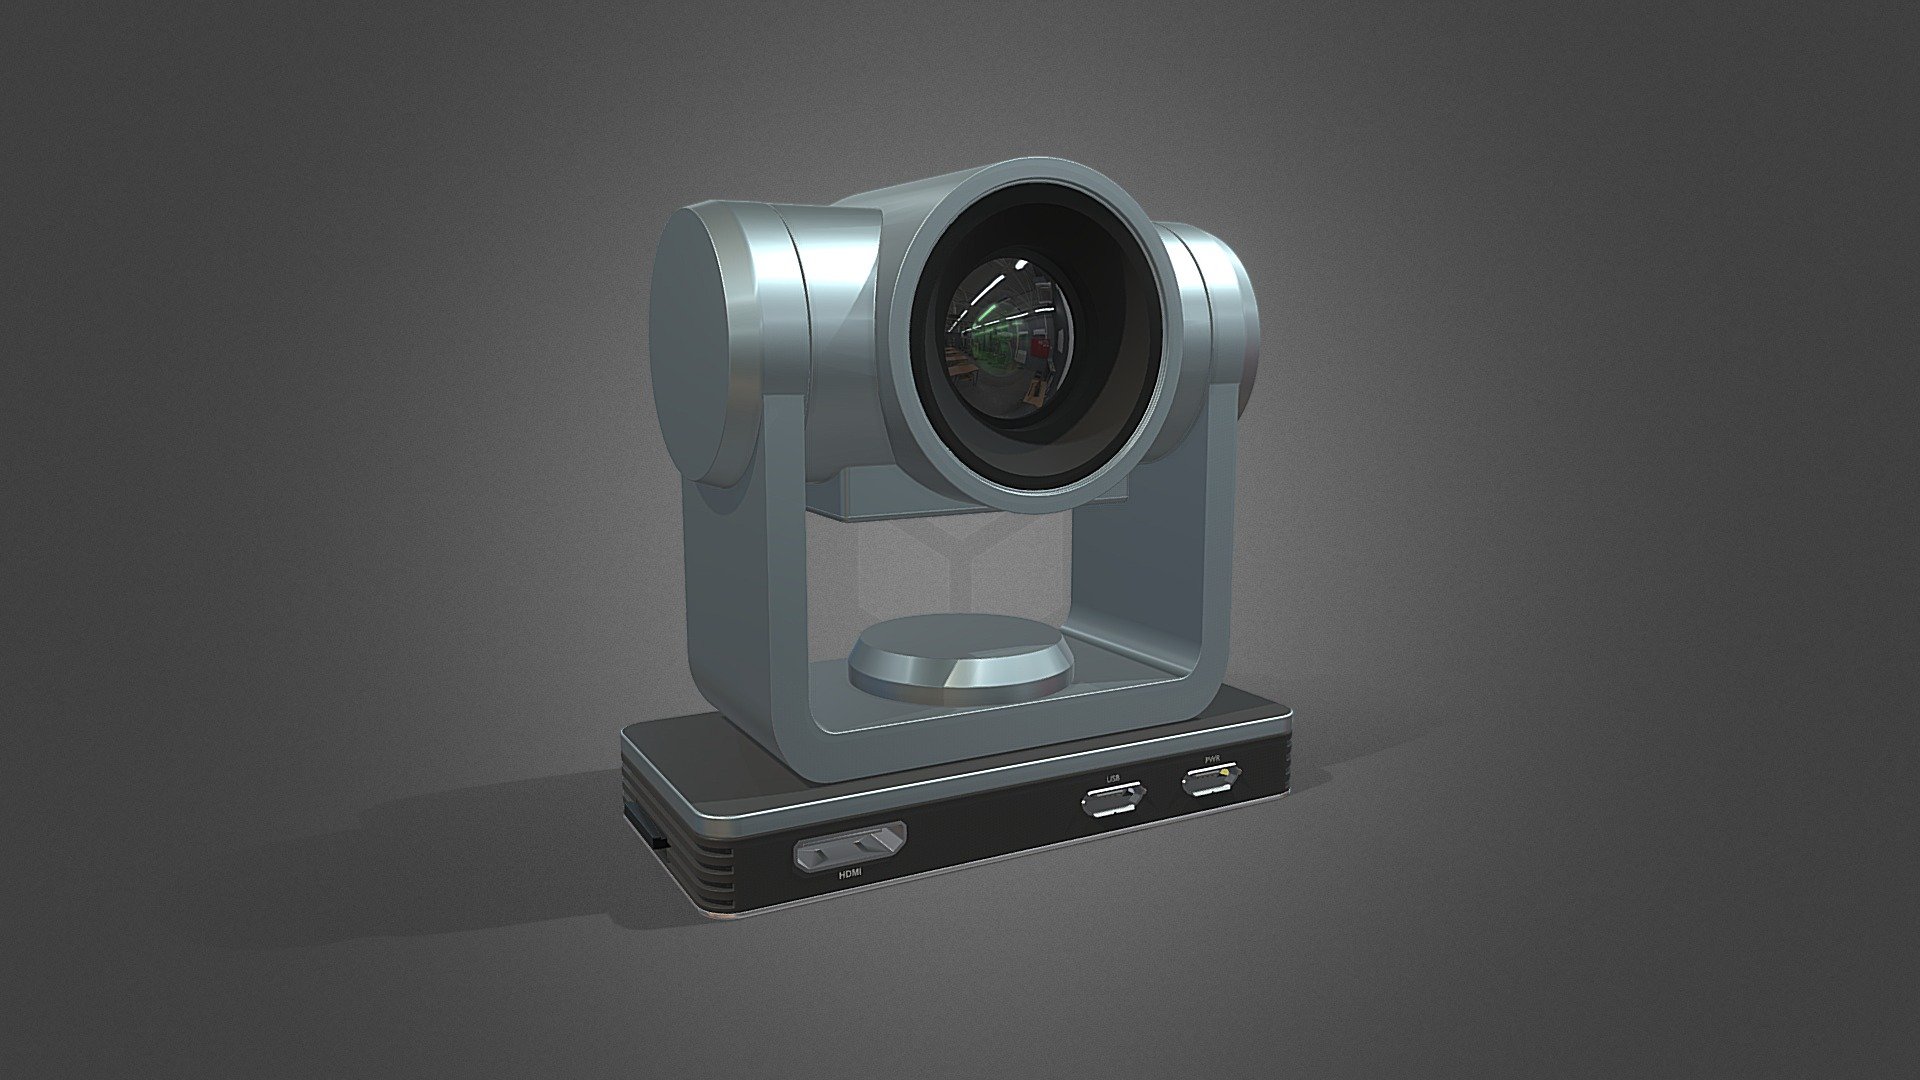 A rigged mochup of a Wireless, Pan Tilt Zoom (PTZ) Camera - Wireless PTZ Camera - Buy Royalty Free 3D model by PhotoGramGear 3d model